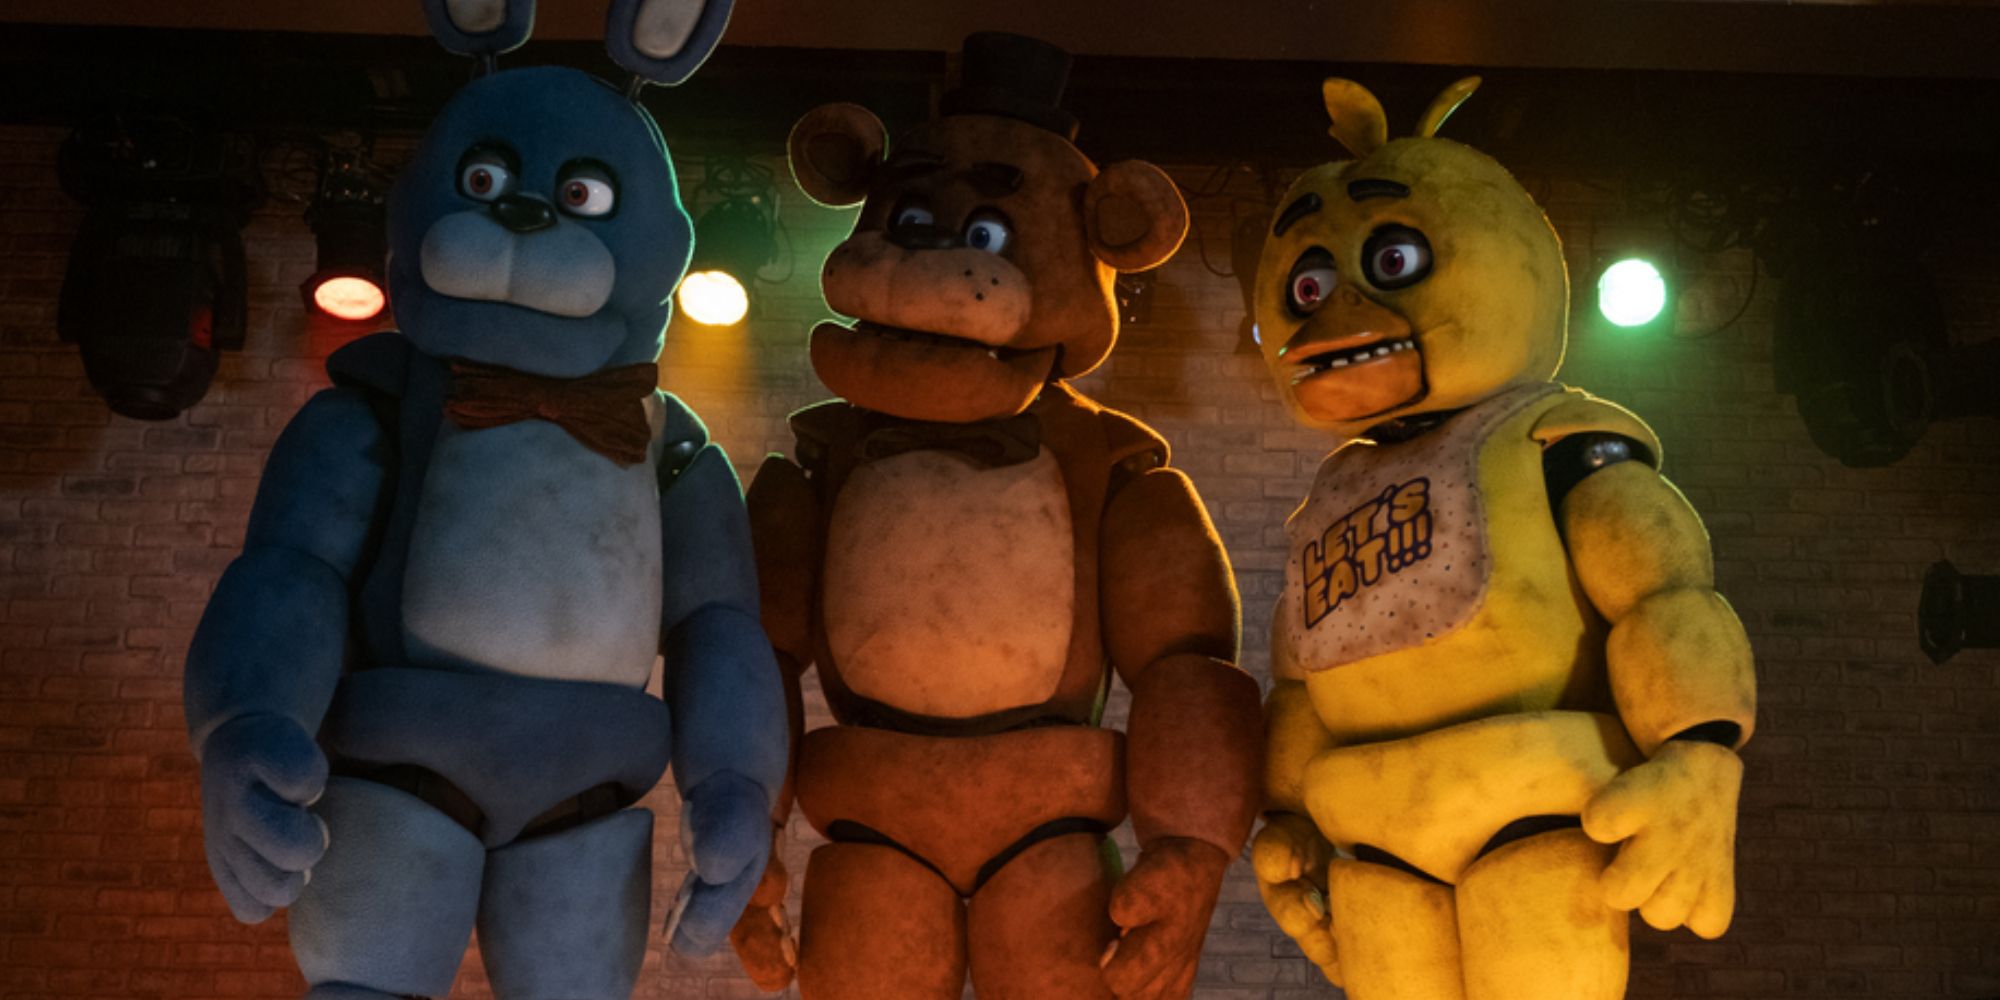 Five Nights At Freddies animatronics stood on a stage looking off the to the left